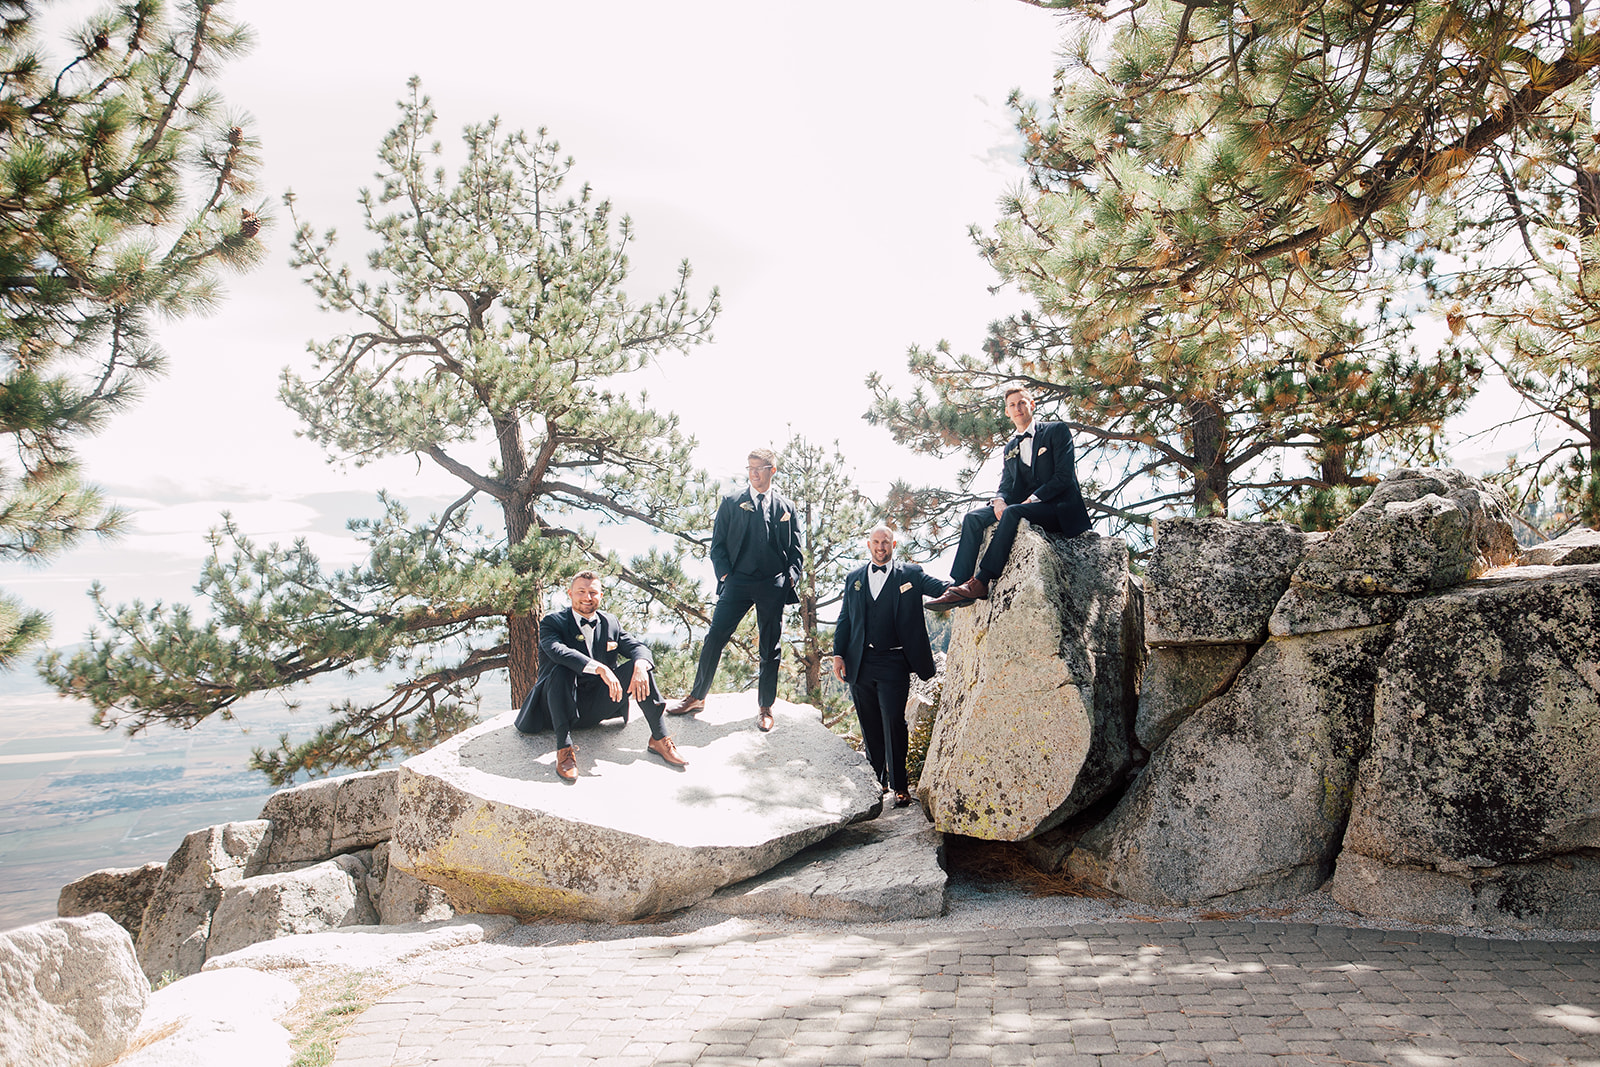 Couple poses with their wedding party on their wedding day in Lake Tahoe